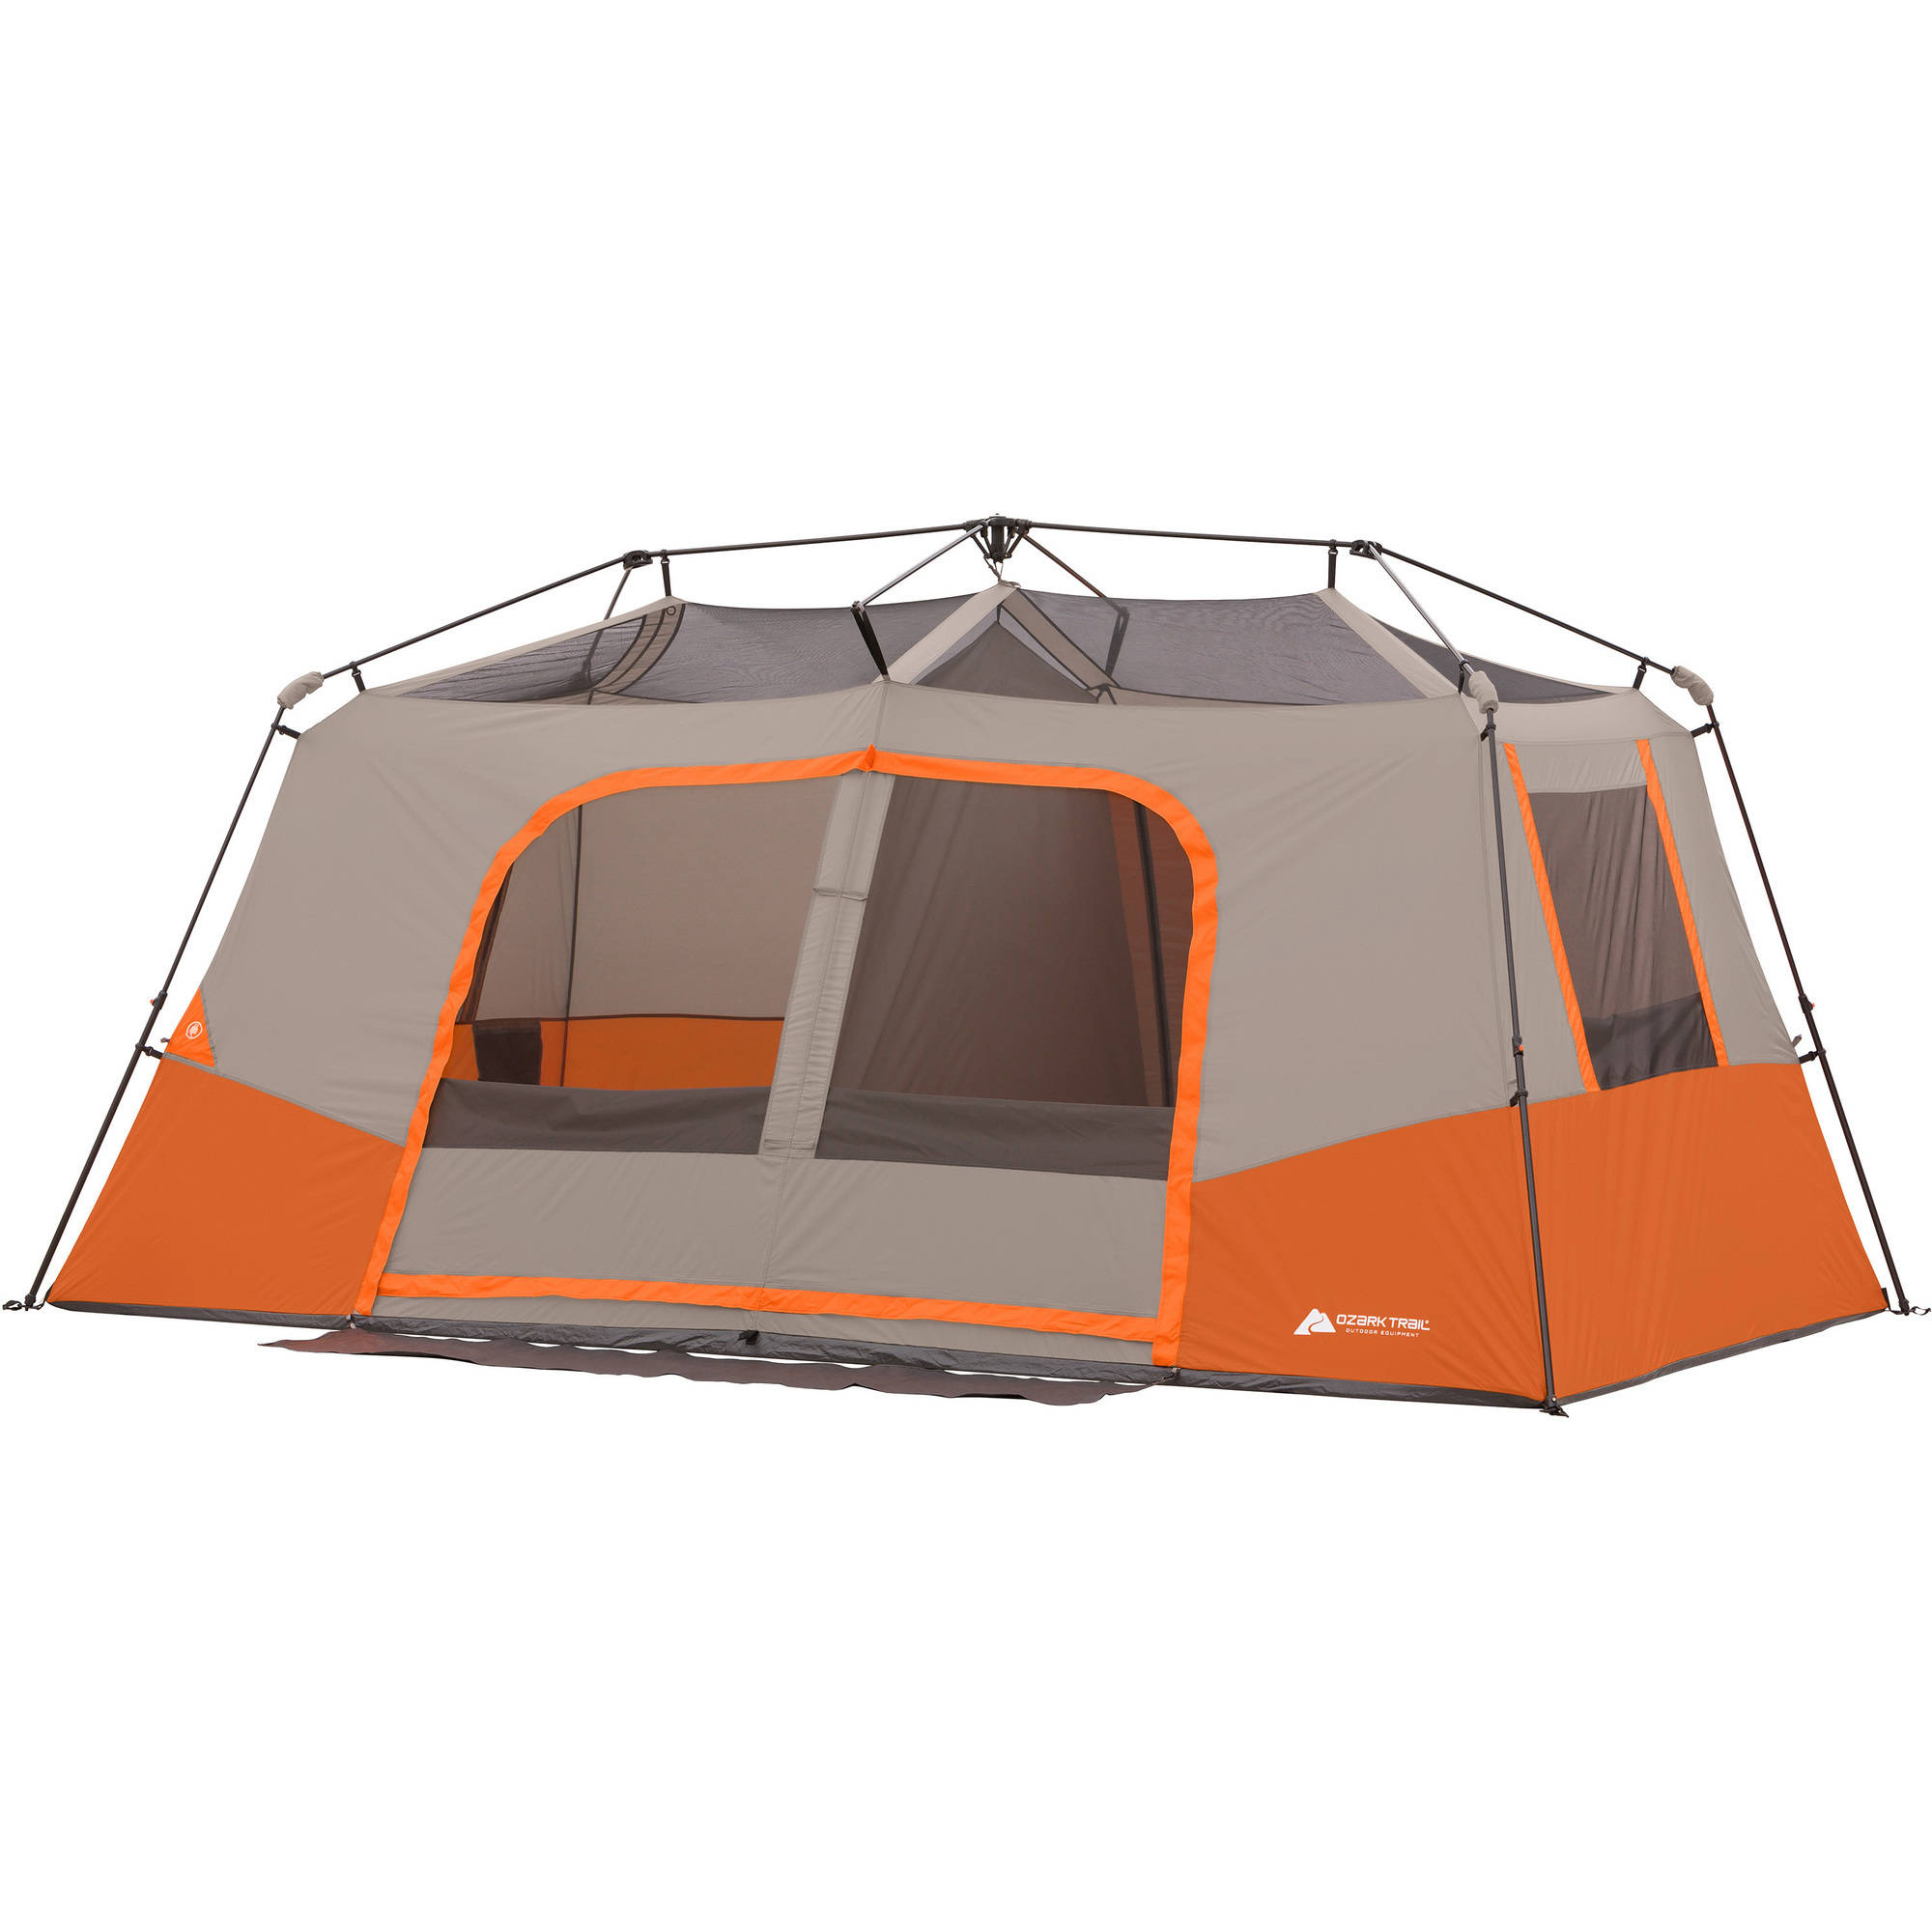 Ozark Trail  14' x 14' 11-Person Instant Cabin Tent with Private Room, 38.37 lbs - image 2 of 7